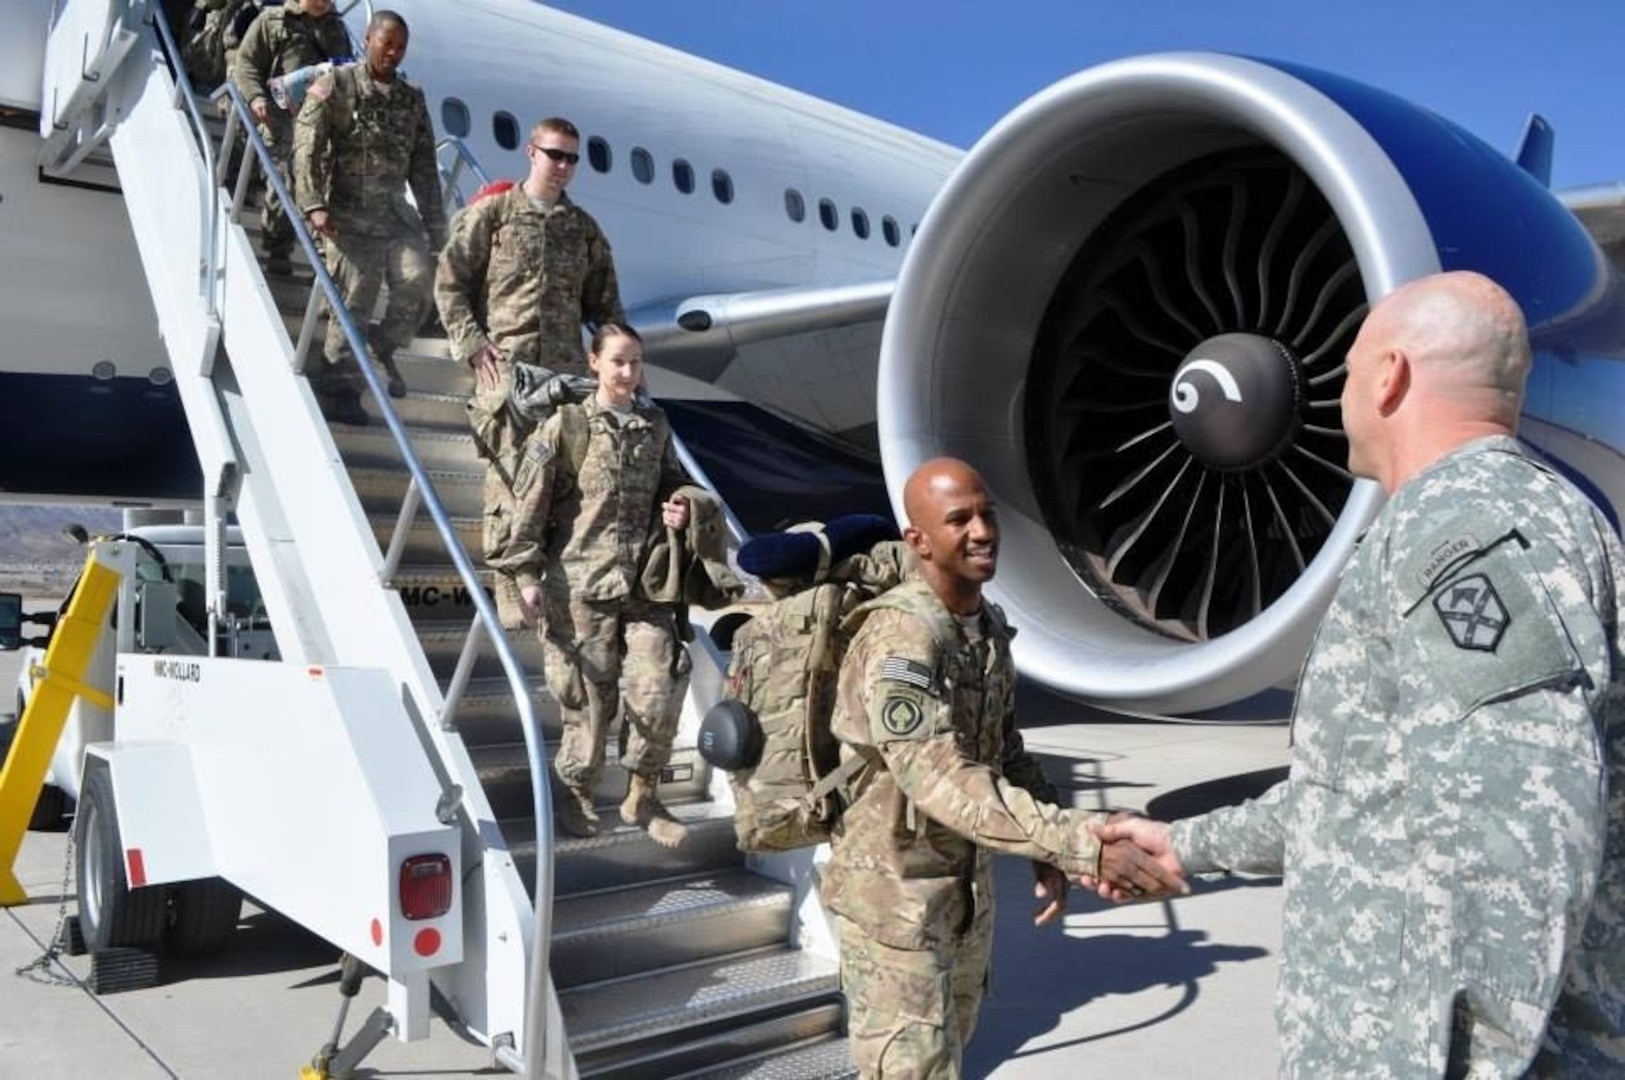 U.S. Army Command Sgt. Maj. Aarion Franklin, Maryland National Guard, is greeted after returning from deployment to Afghanistan Jan. 28, 2014, at Fort Bliss, El Paso, Texas. Franklin was among the many MDNG members who responded to the attacks on Sep. 11, 2001.